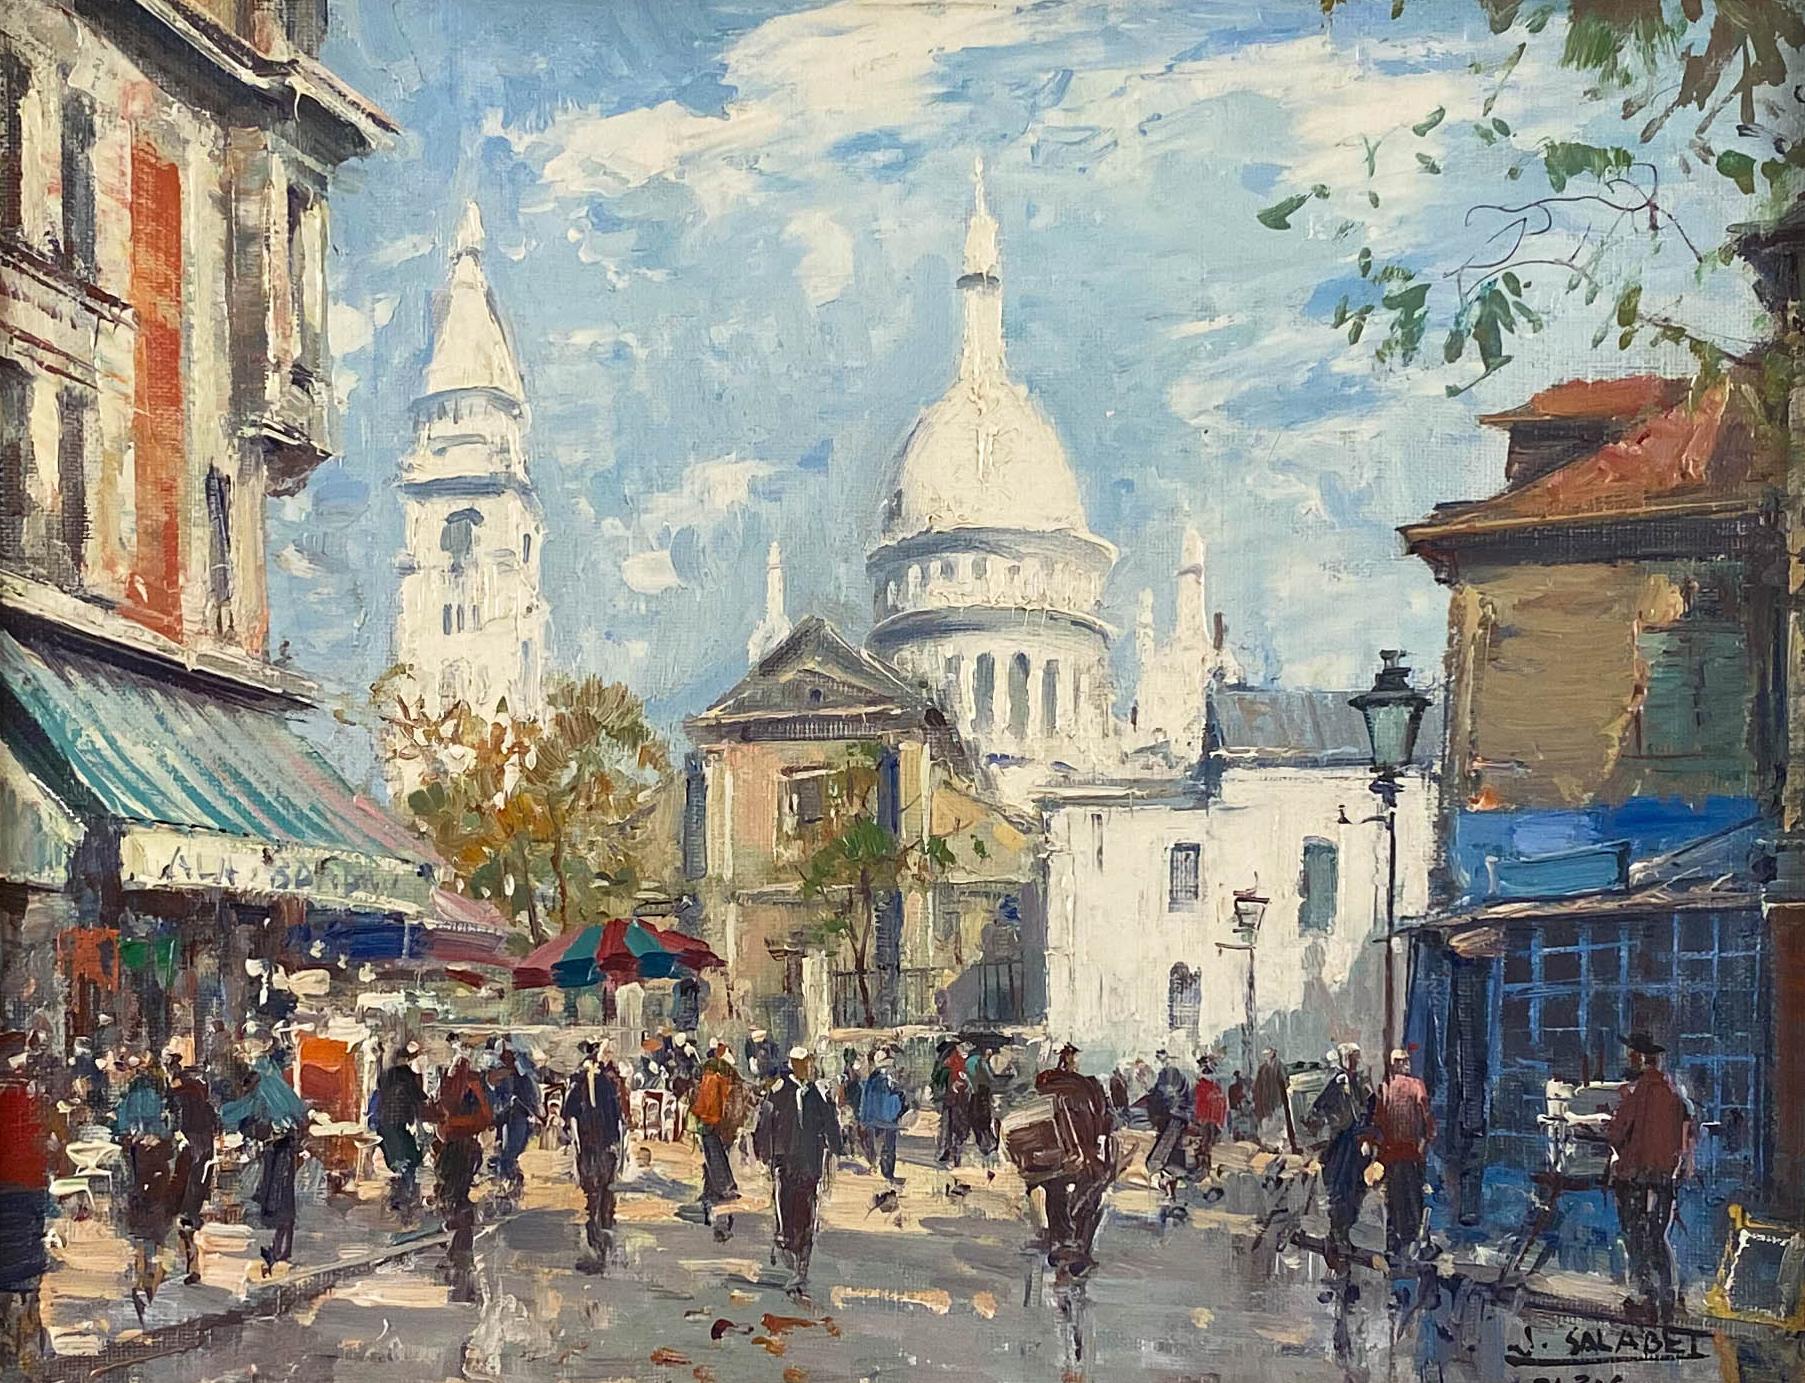 Montmatre - Painting by Jean Salabet